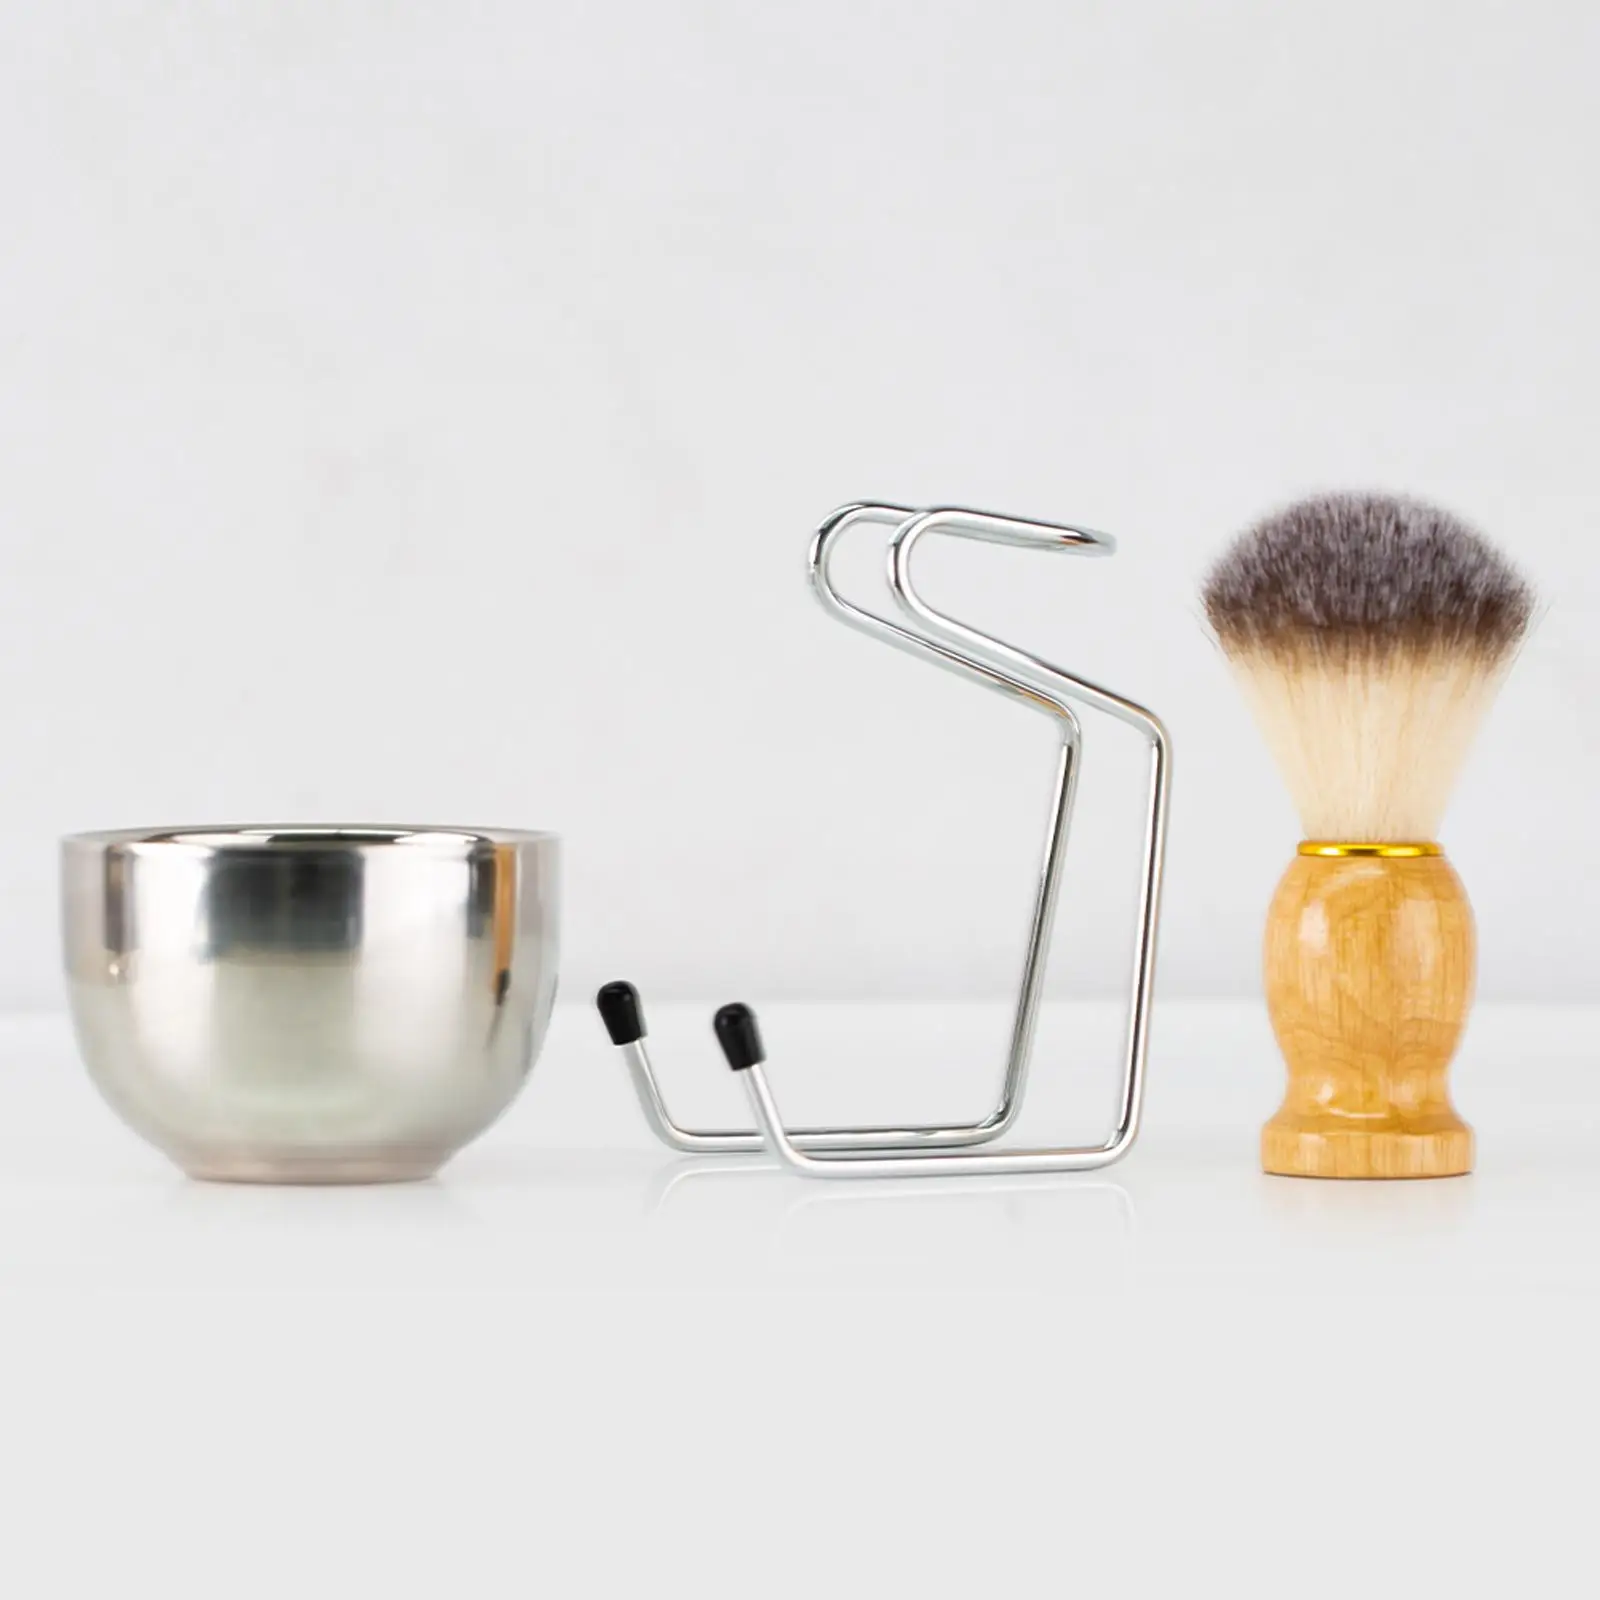 Wet Shaving Kit with Shave Brush Stand Mug, Easy to Install Professional Durable